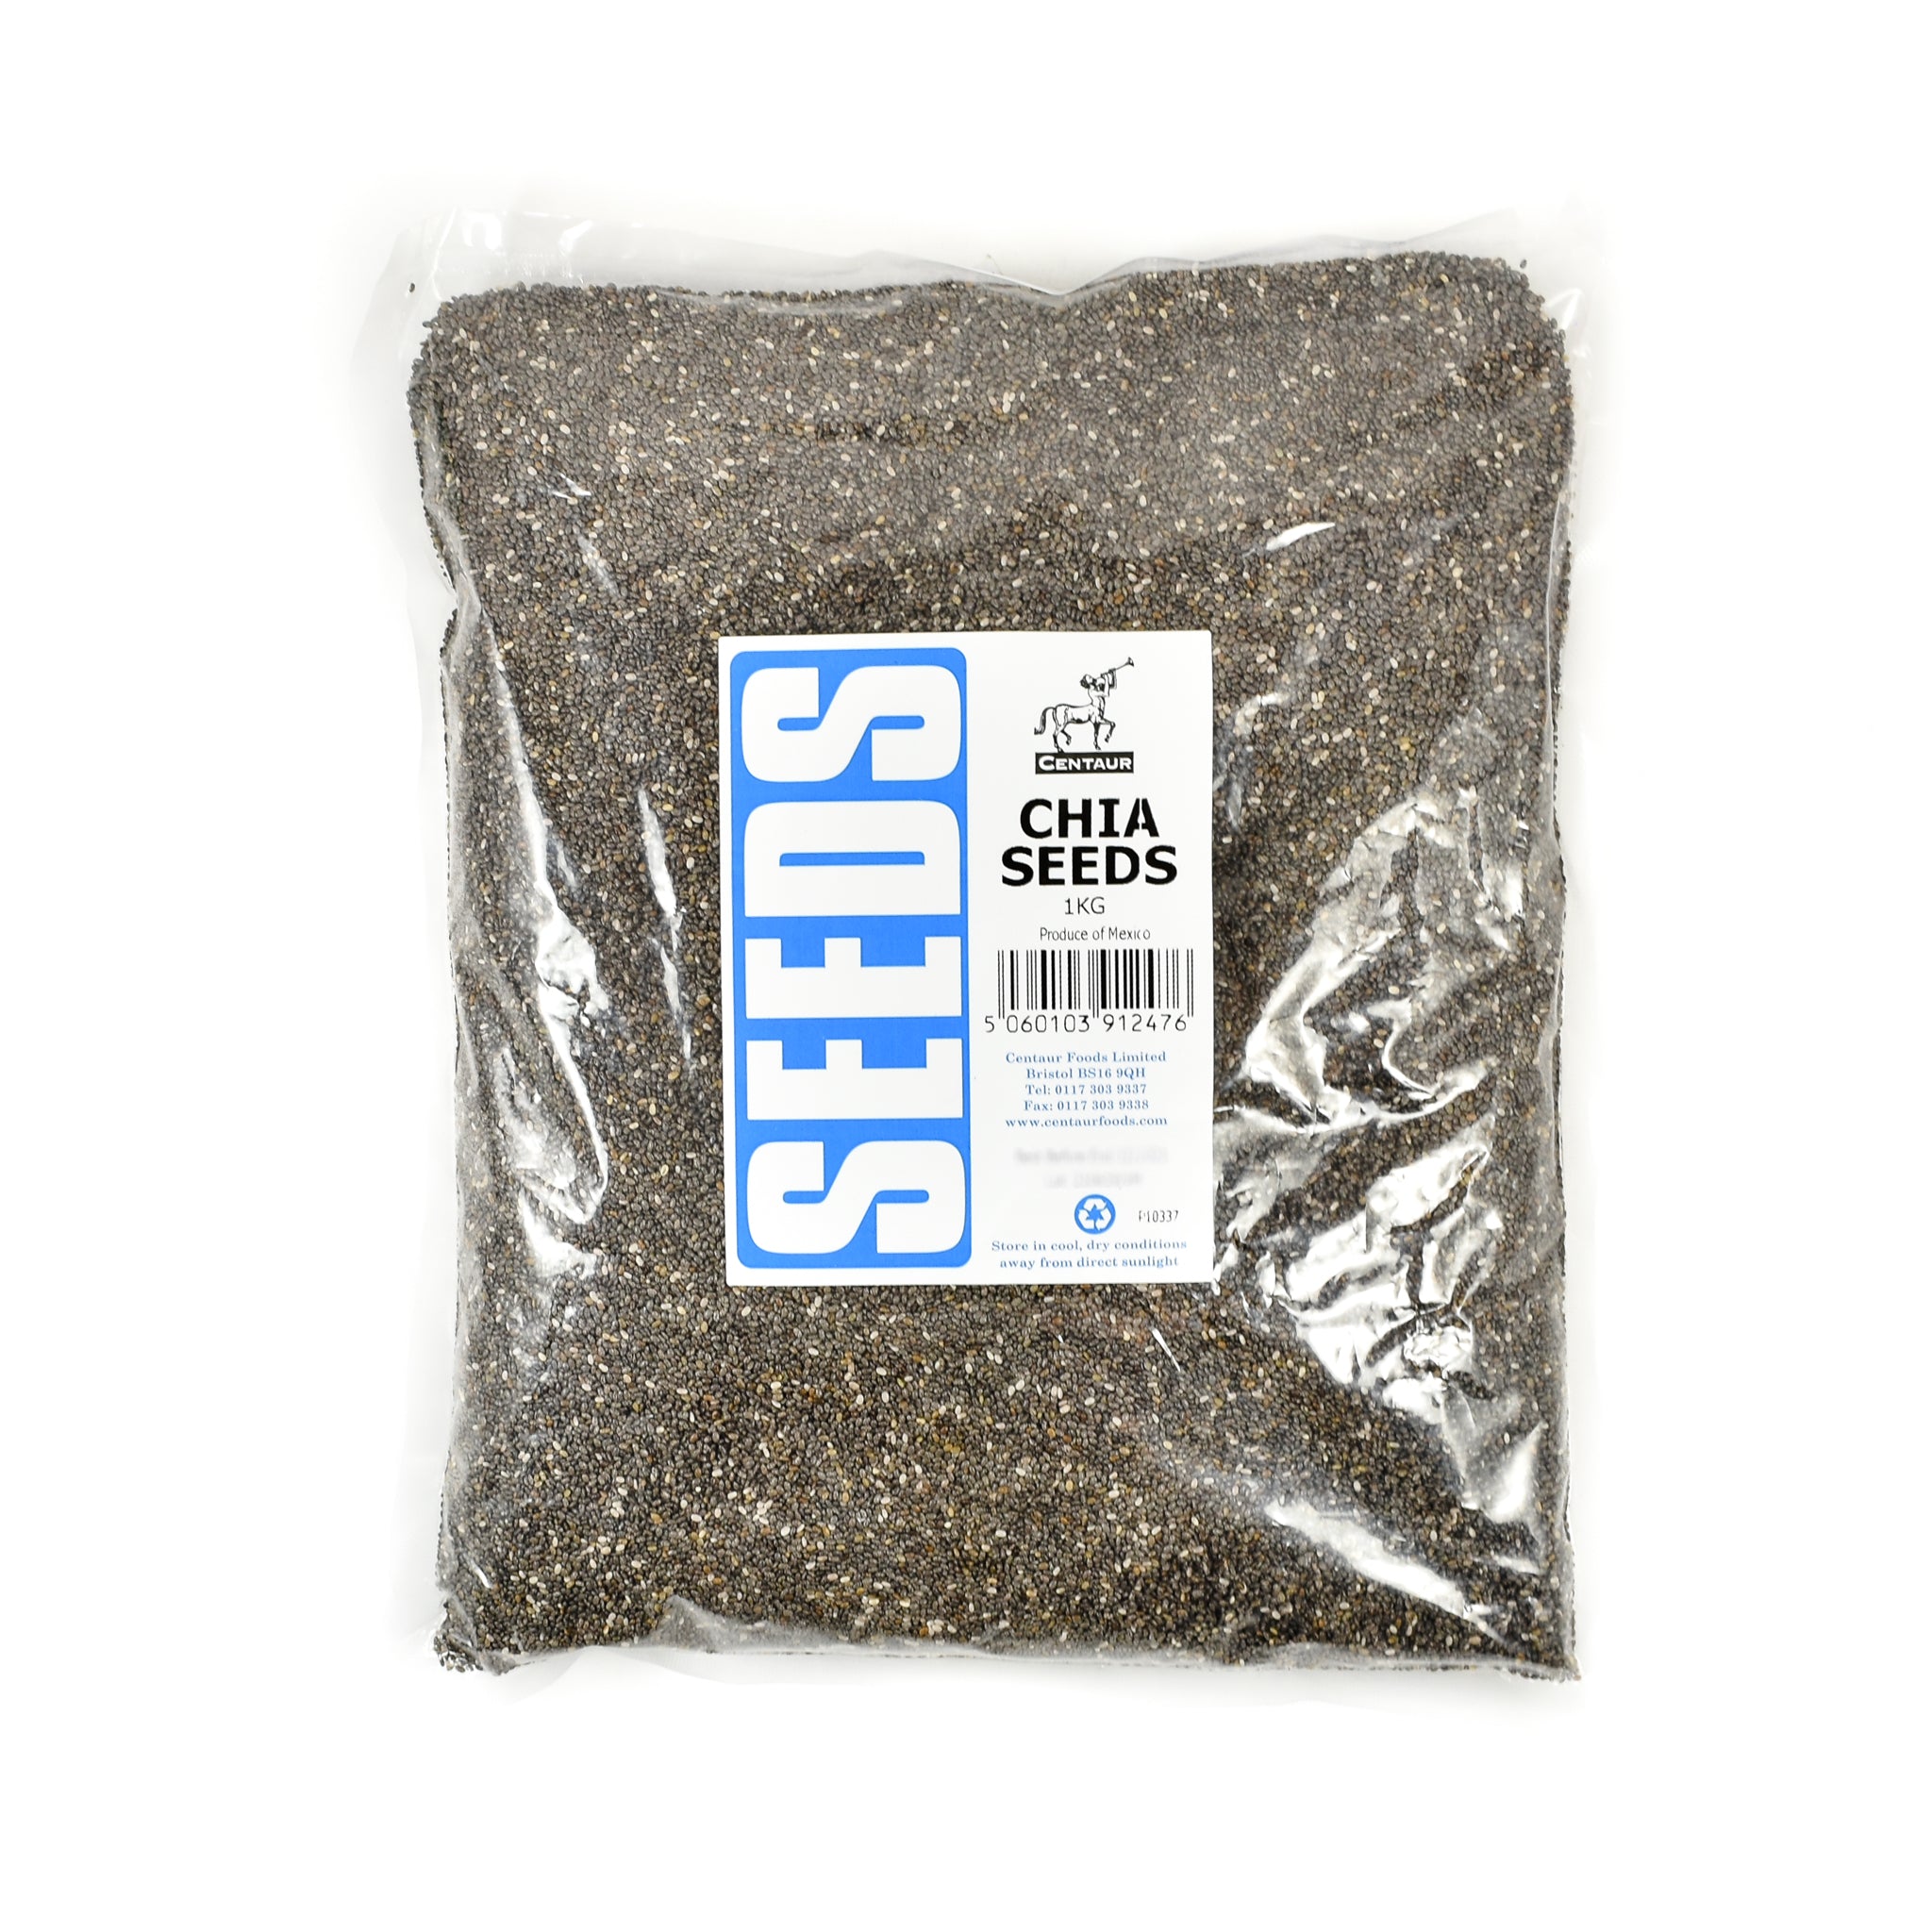 Chia Seeds 1kg - Buy online today at Sous Chef UK